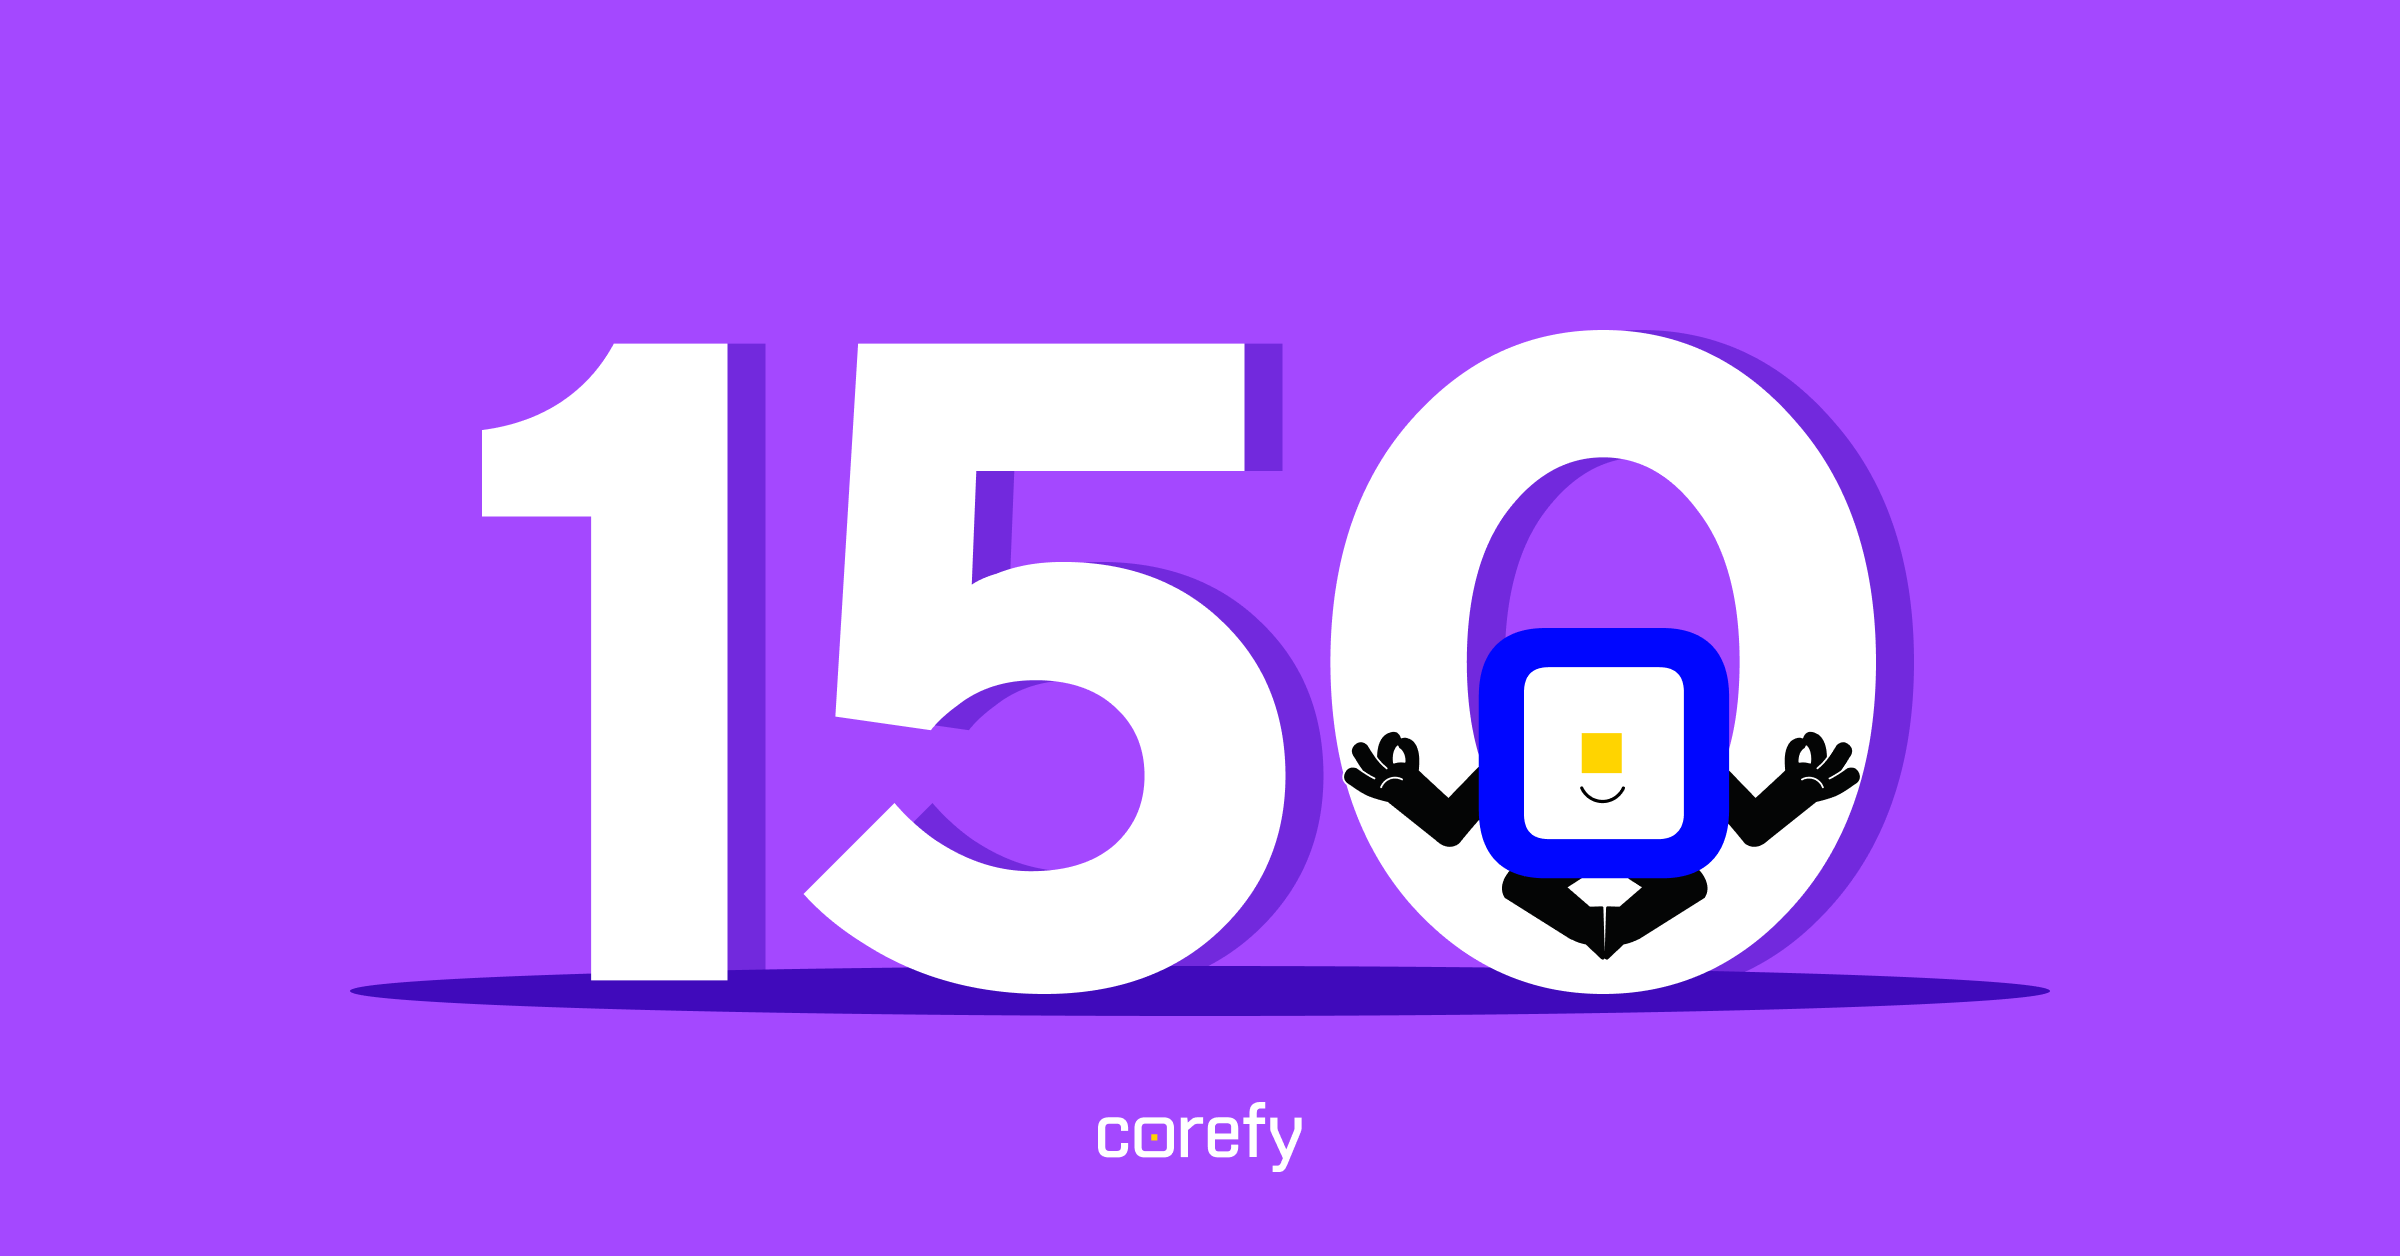 Corefy now offers 150+ integrations out-of-the-box